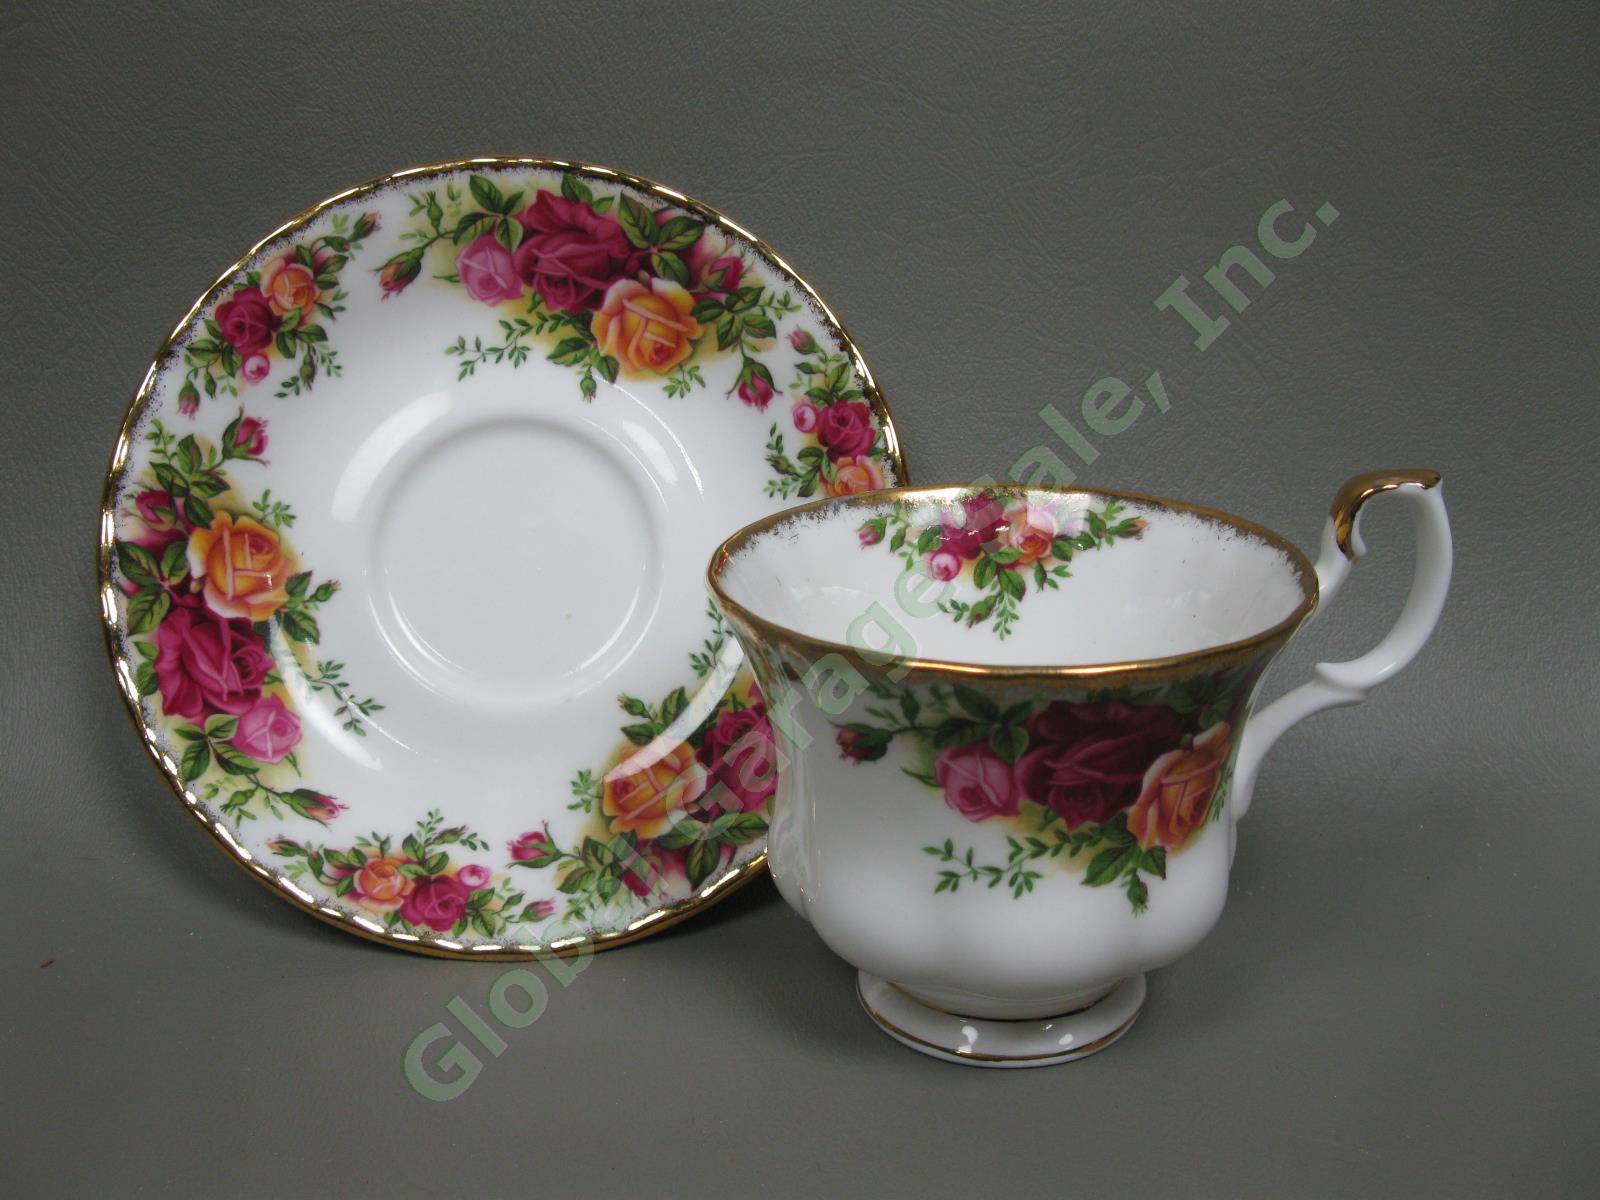 4 Royal Albert Old Country Roses Place Settings Serving Bowl Platter Plate Set 18